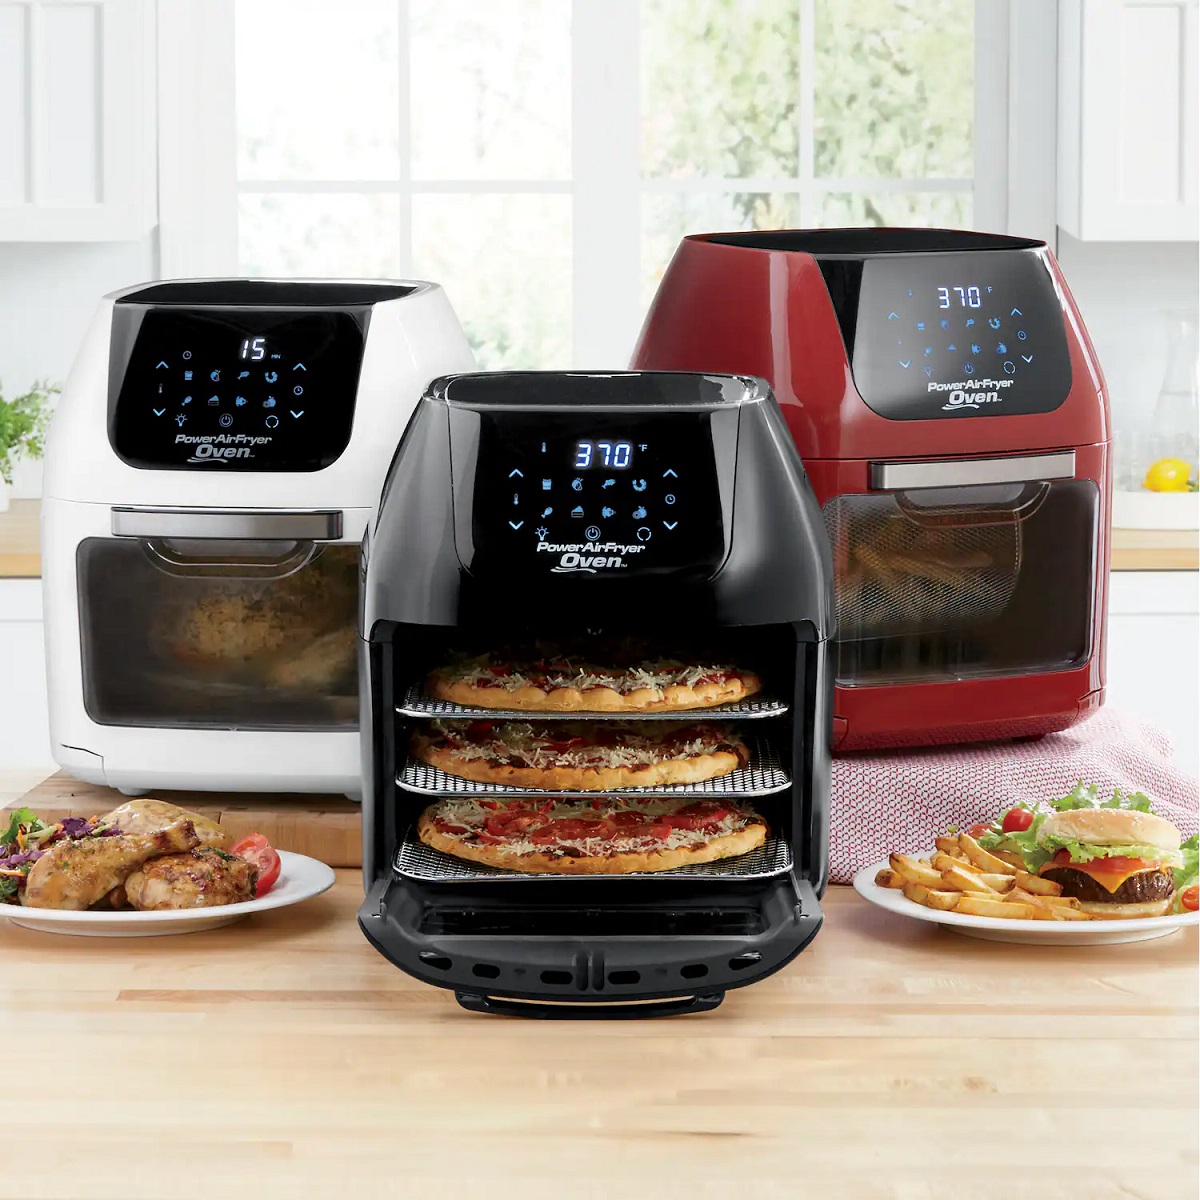  Emeril Lagasse Power Air Fryer Oven 360,2020 Model,Special  Edition,9-in-1 Multi Cooker,Free Emeril's Recipe Book Included ,Digital  Display, Slick Design,With Special 1 Year Warranty,As Seen On TV : Home &  Kitchen